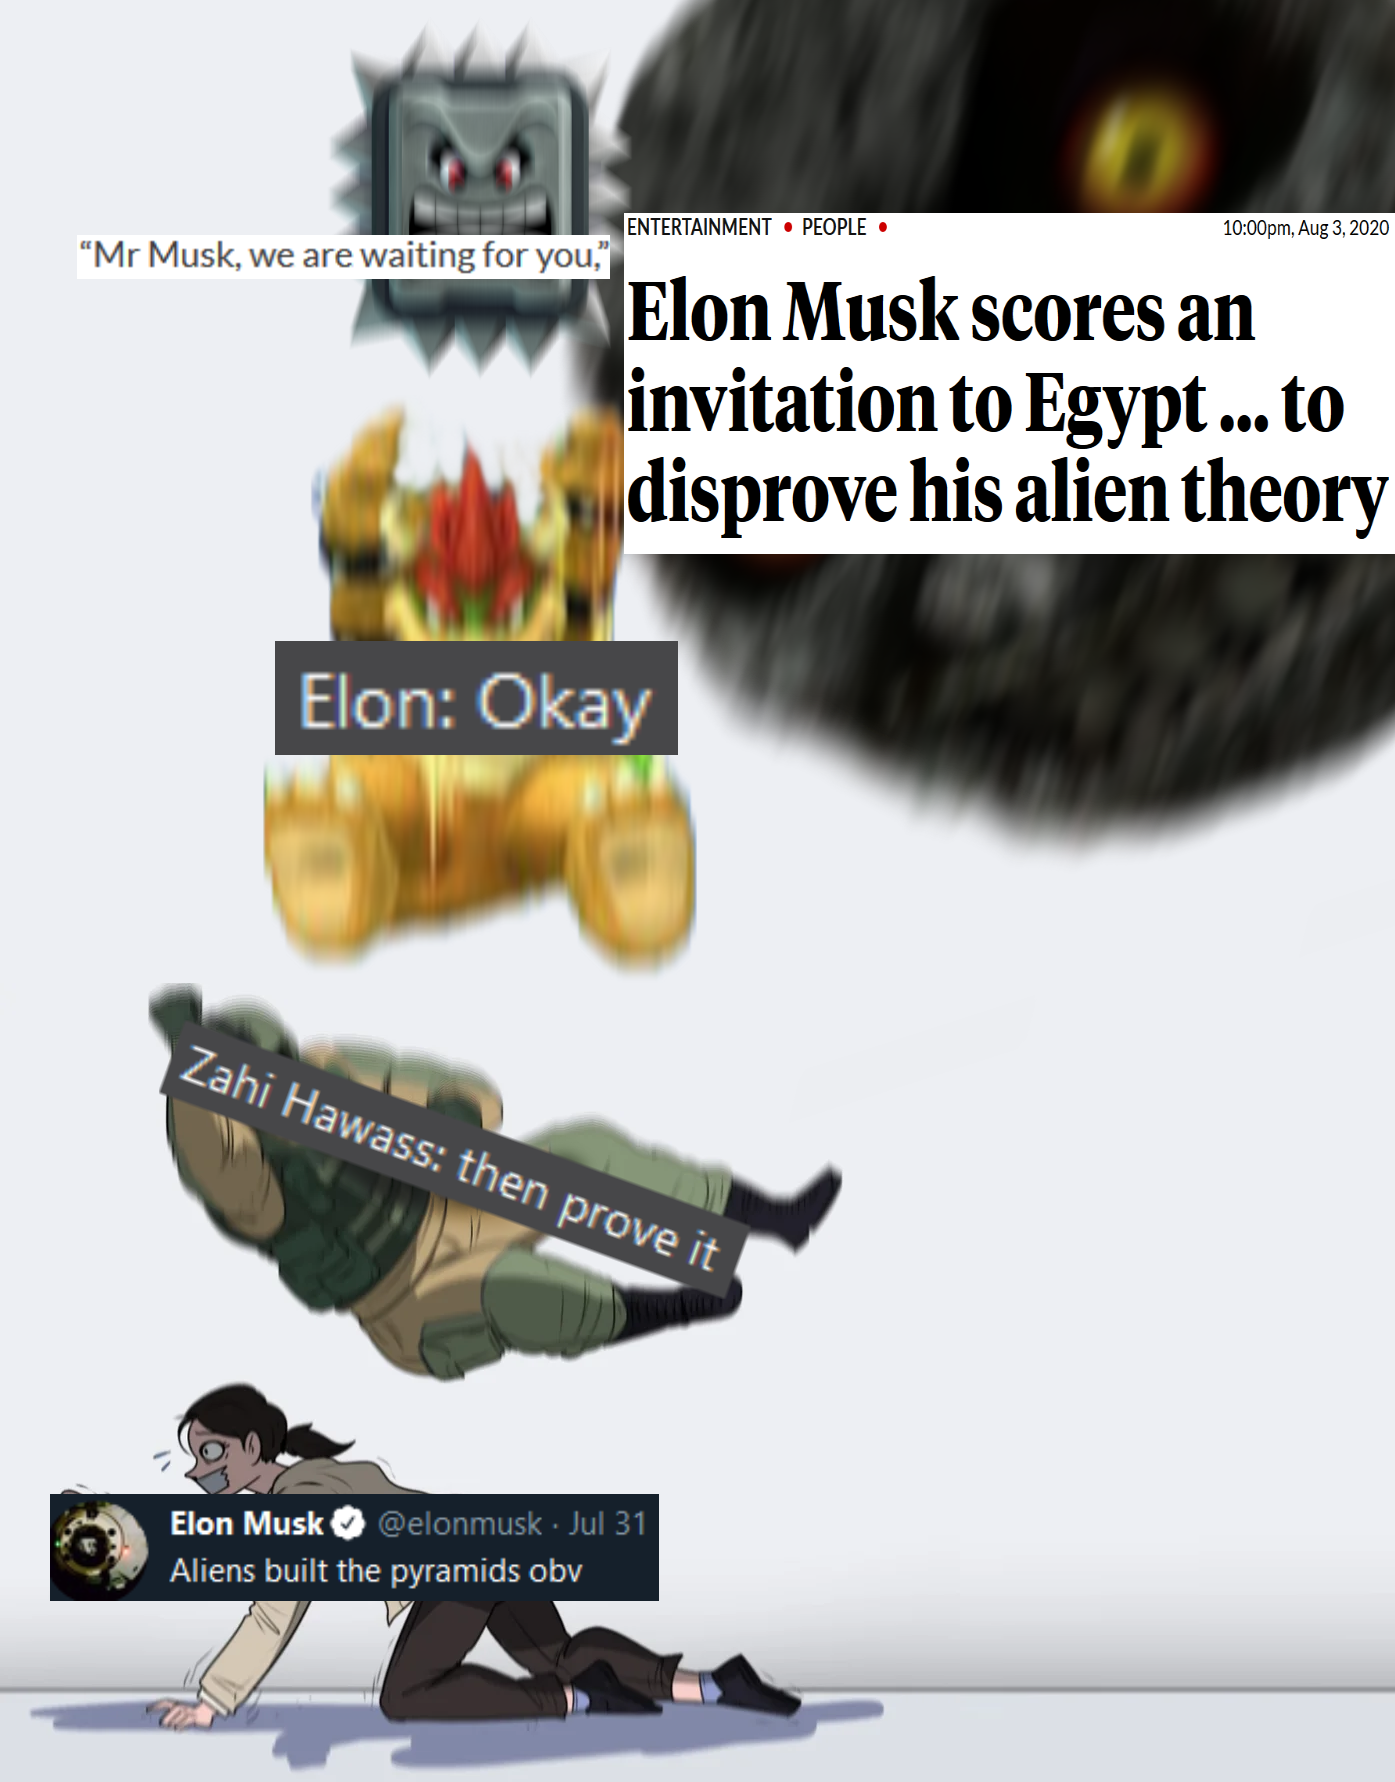 dank memes - crushing combo meme - Entertainment Porto "Mr Musk, we are waiting for you Elon Musk scores an invitation to Egypt ...to disprove his alien theory Elon Okay Zahi Hawass then prove it Elon Musk clomunk 1131 Aliens built the pyramids oby